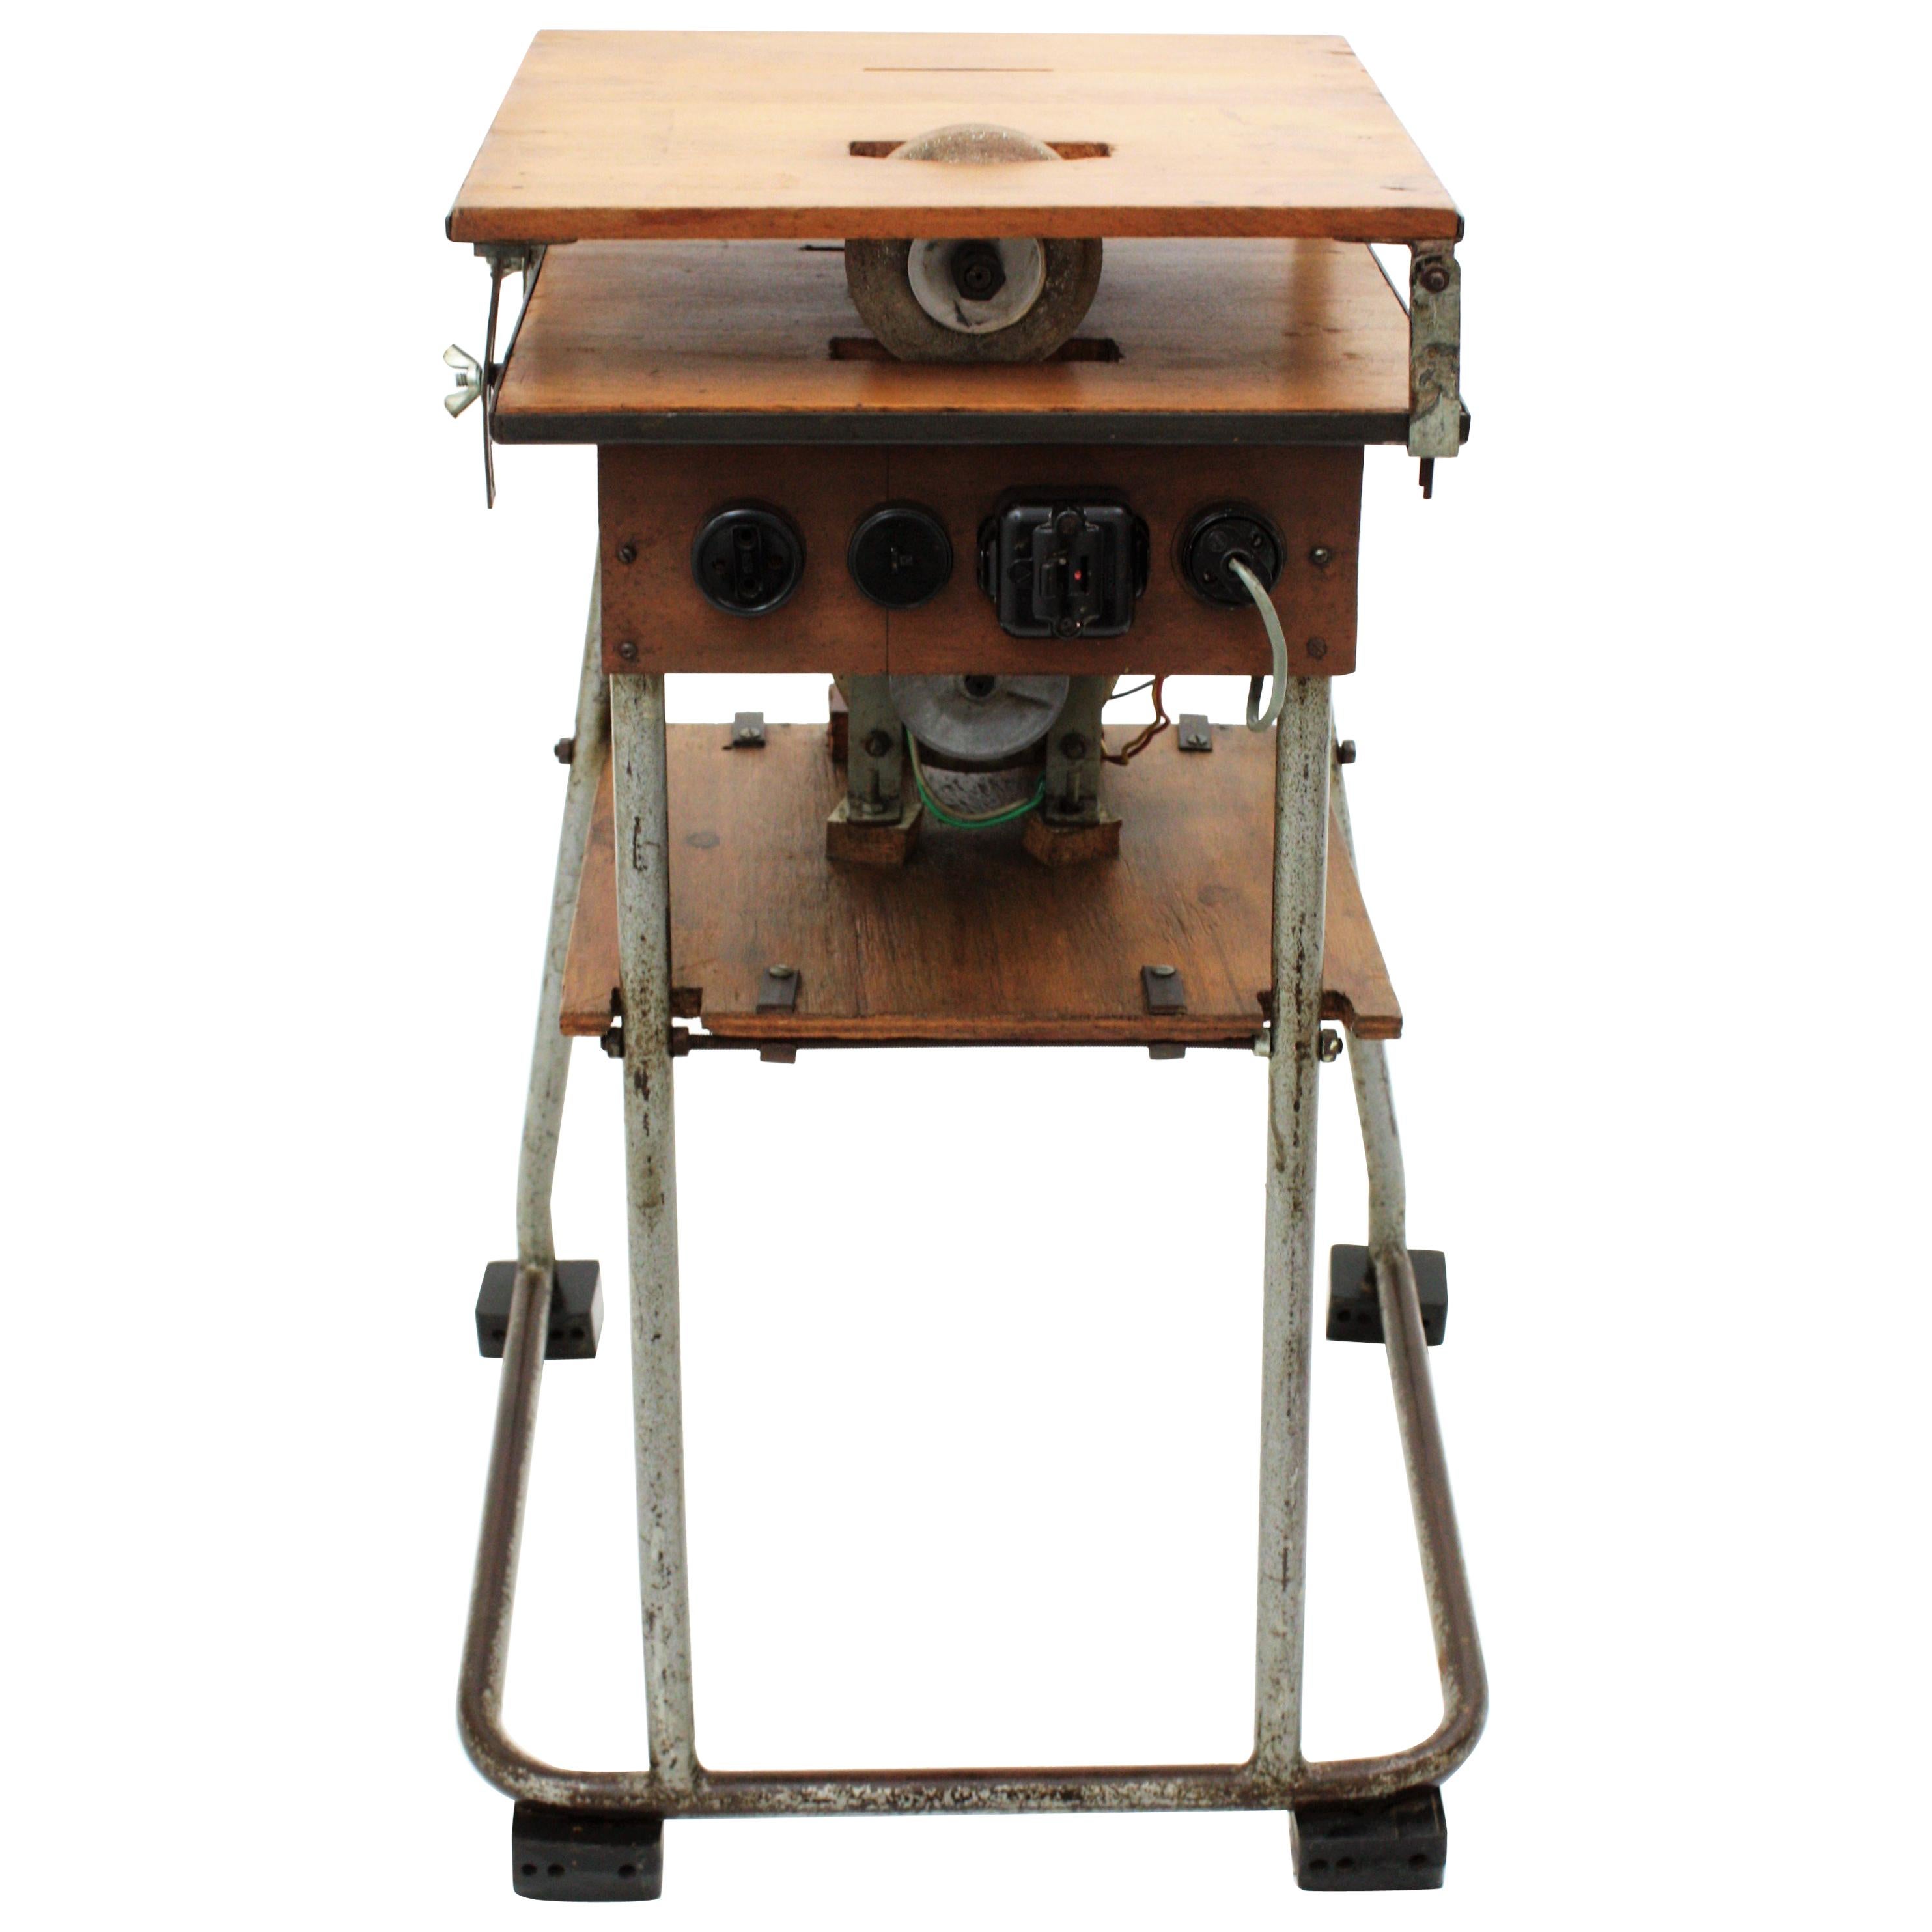 Spanish power saw and milling machine craftsman Industrial work table or Stand. Spain, 1940s.
The saw has been removed to use the top surface as a side table and the engine has been blocked. 
A beautiful table placed as end or side table to add an